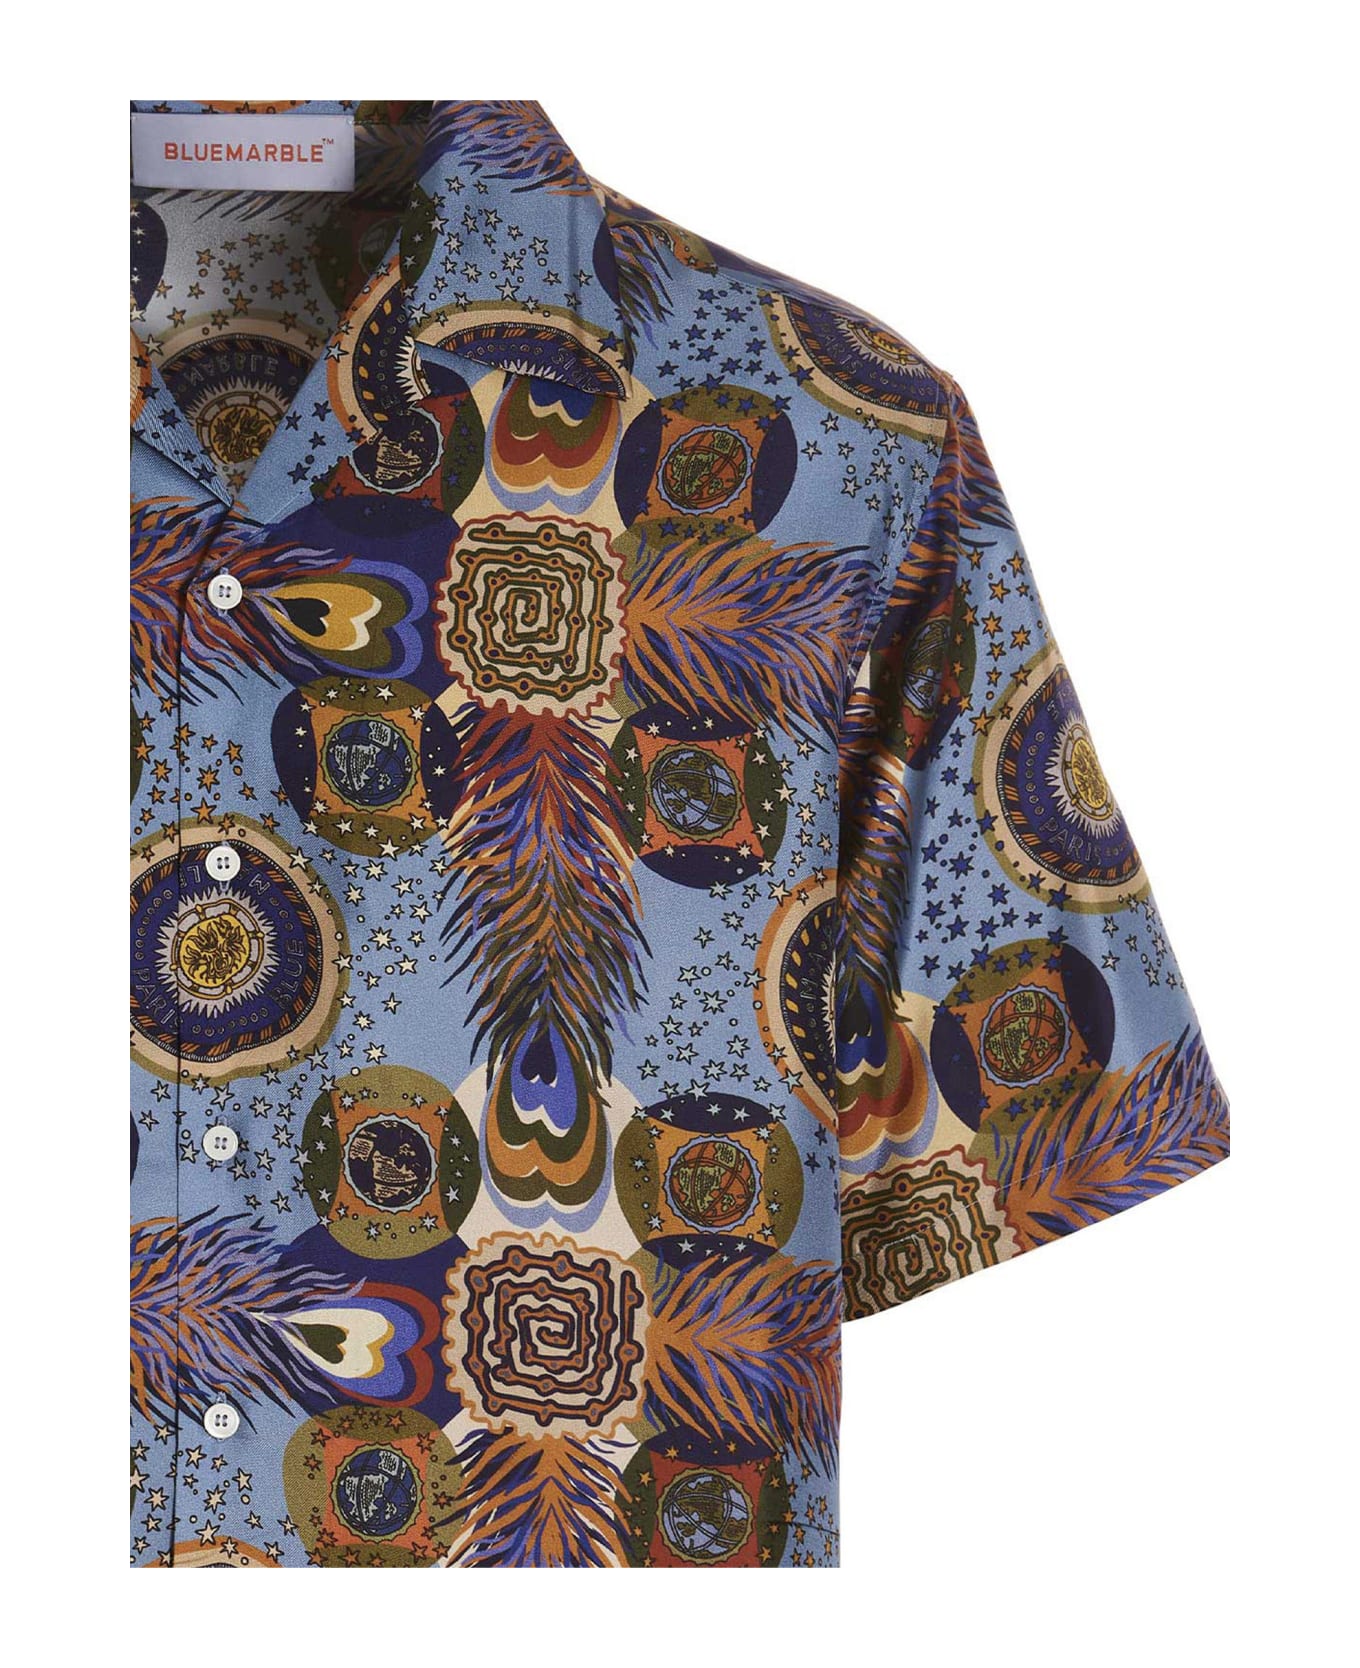 Bluemarble All-over Print Shirt - Multicolor